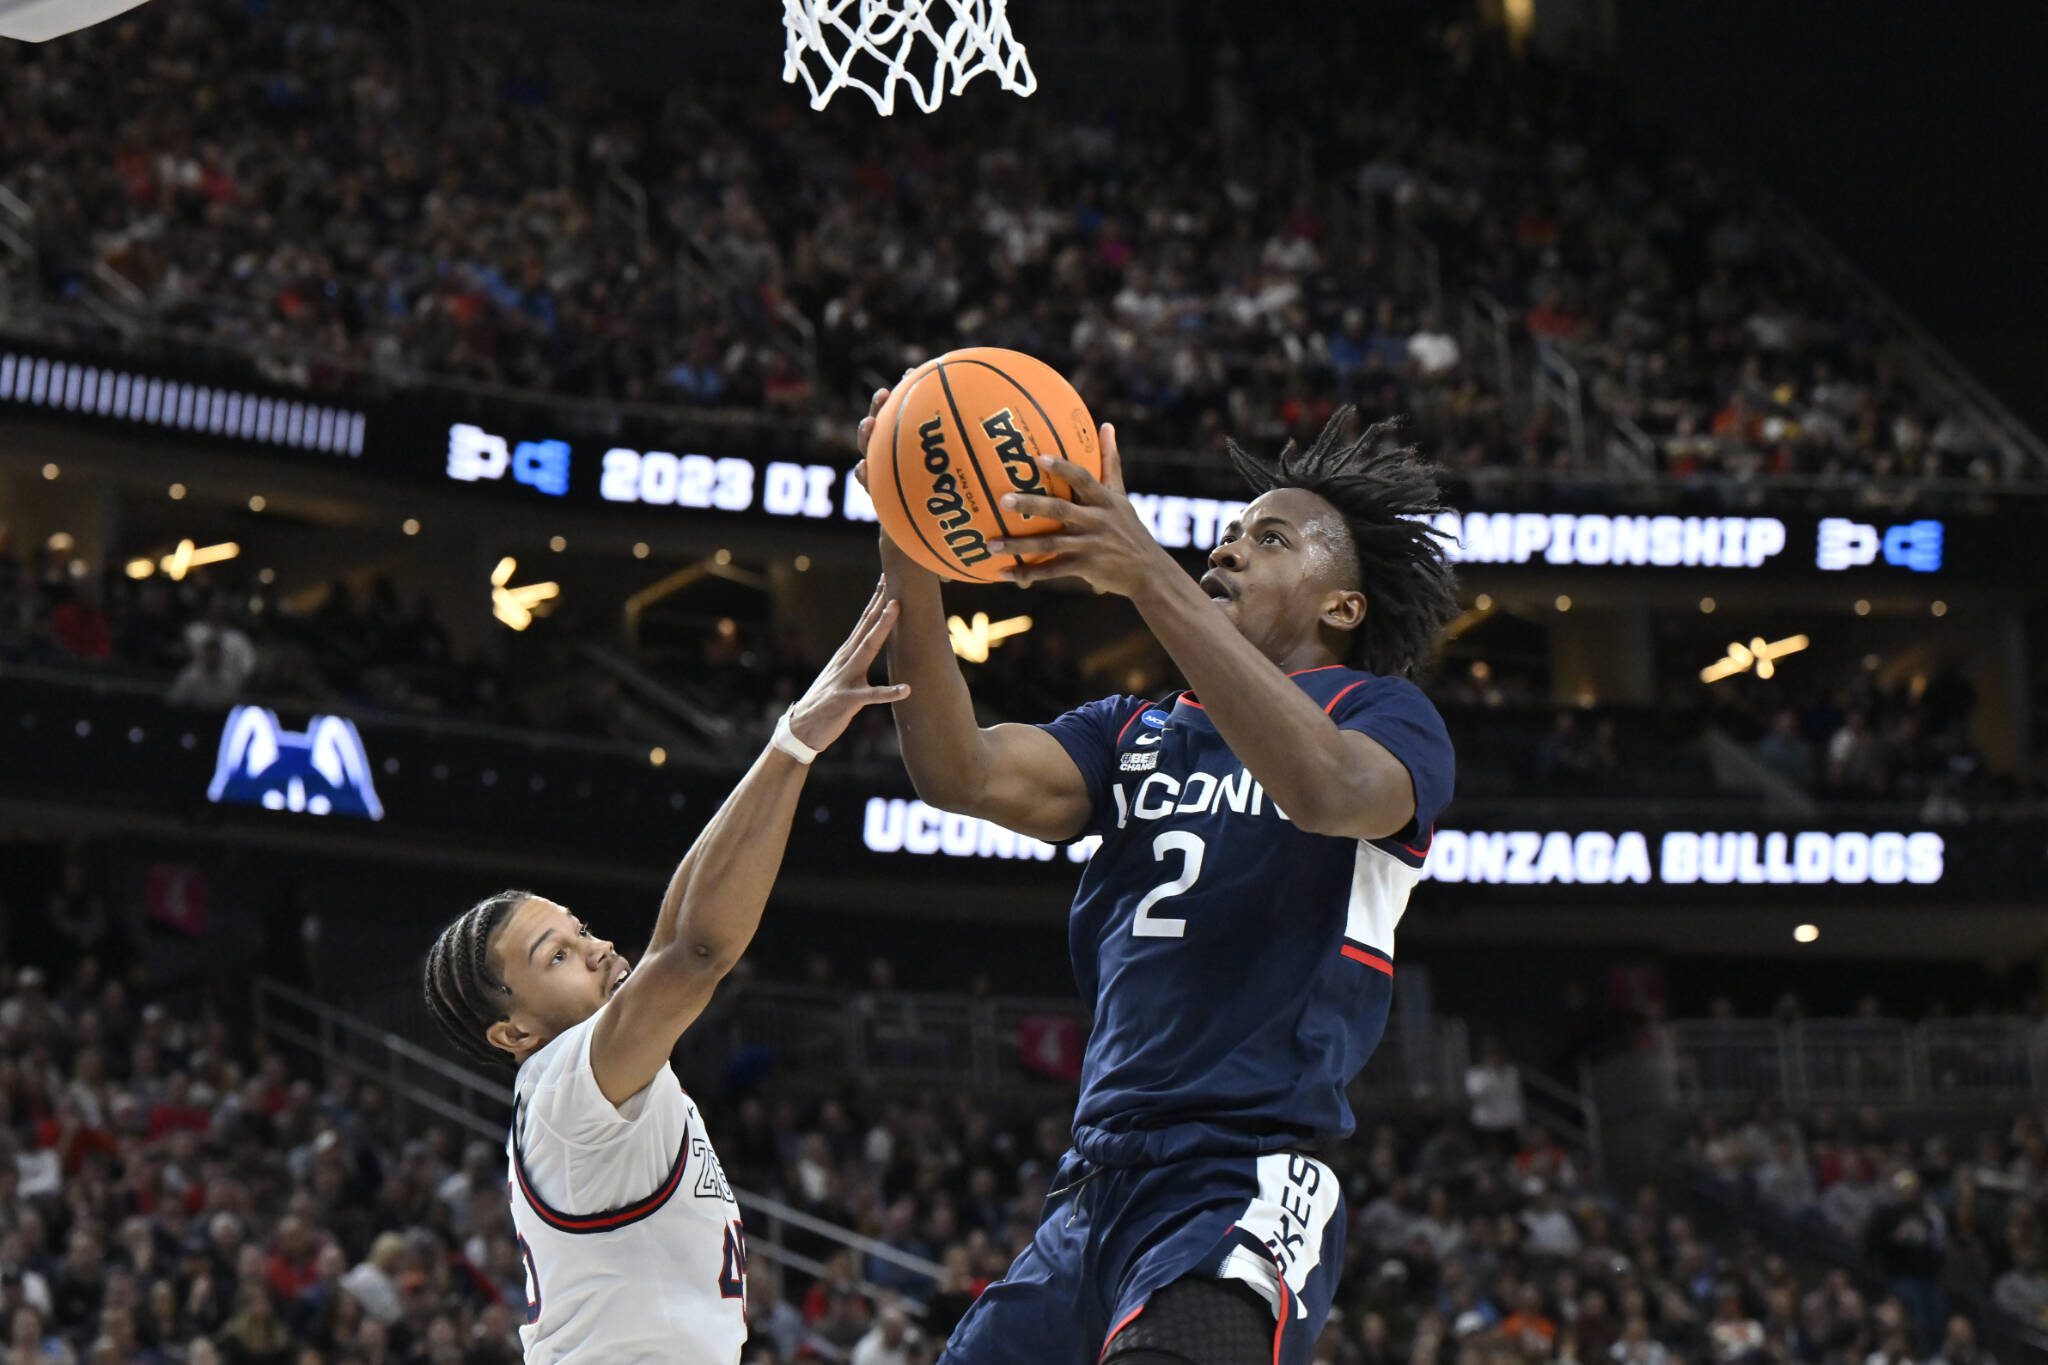 UConn guard Tristen Newton (2) shoots while defended by Gonzaga guard Rasir Bolton in the first half of an Elite 8 game of the NCAA Tournament on Saturday in Las Vegas. (AP Photo/David Becker)